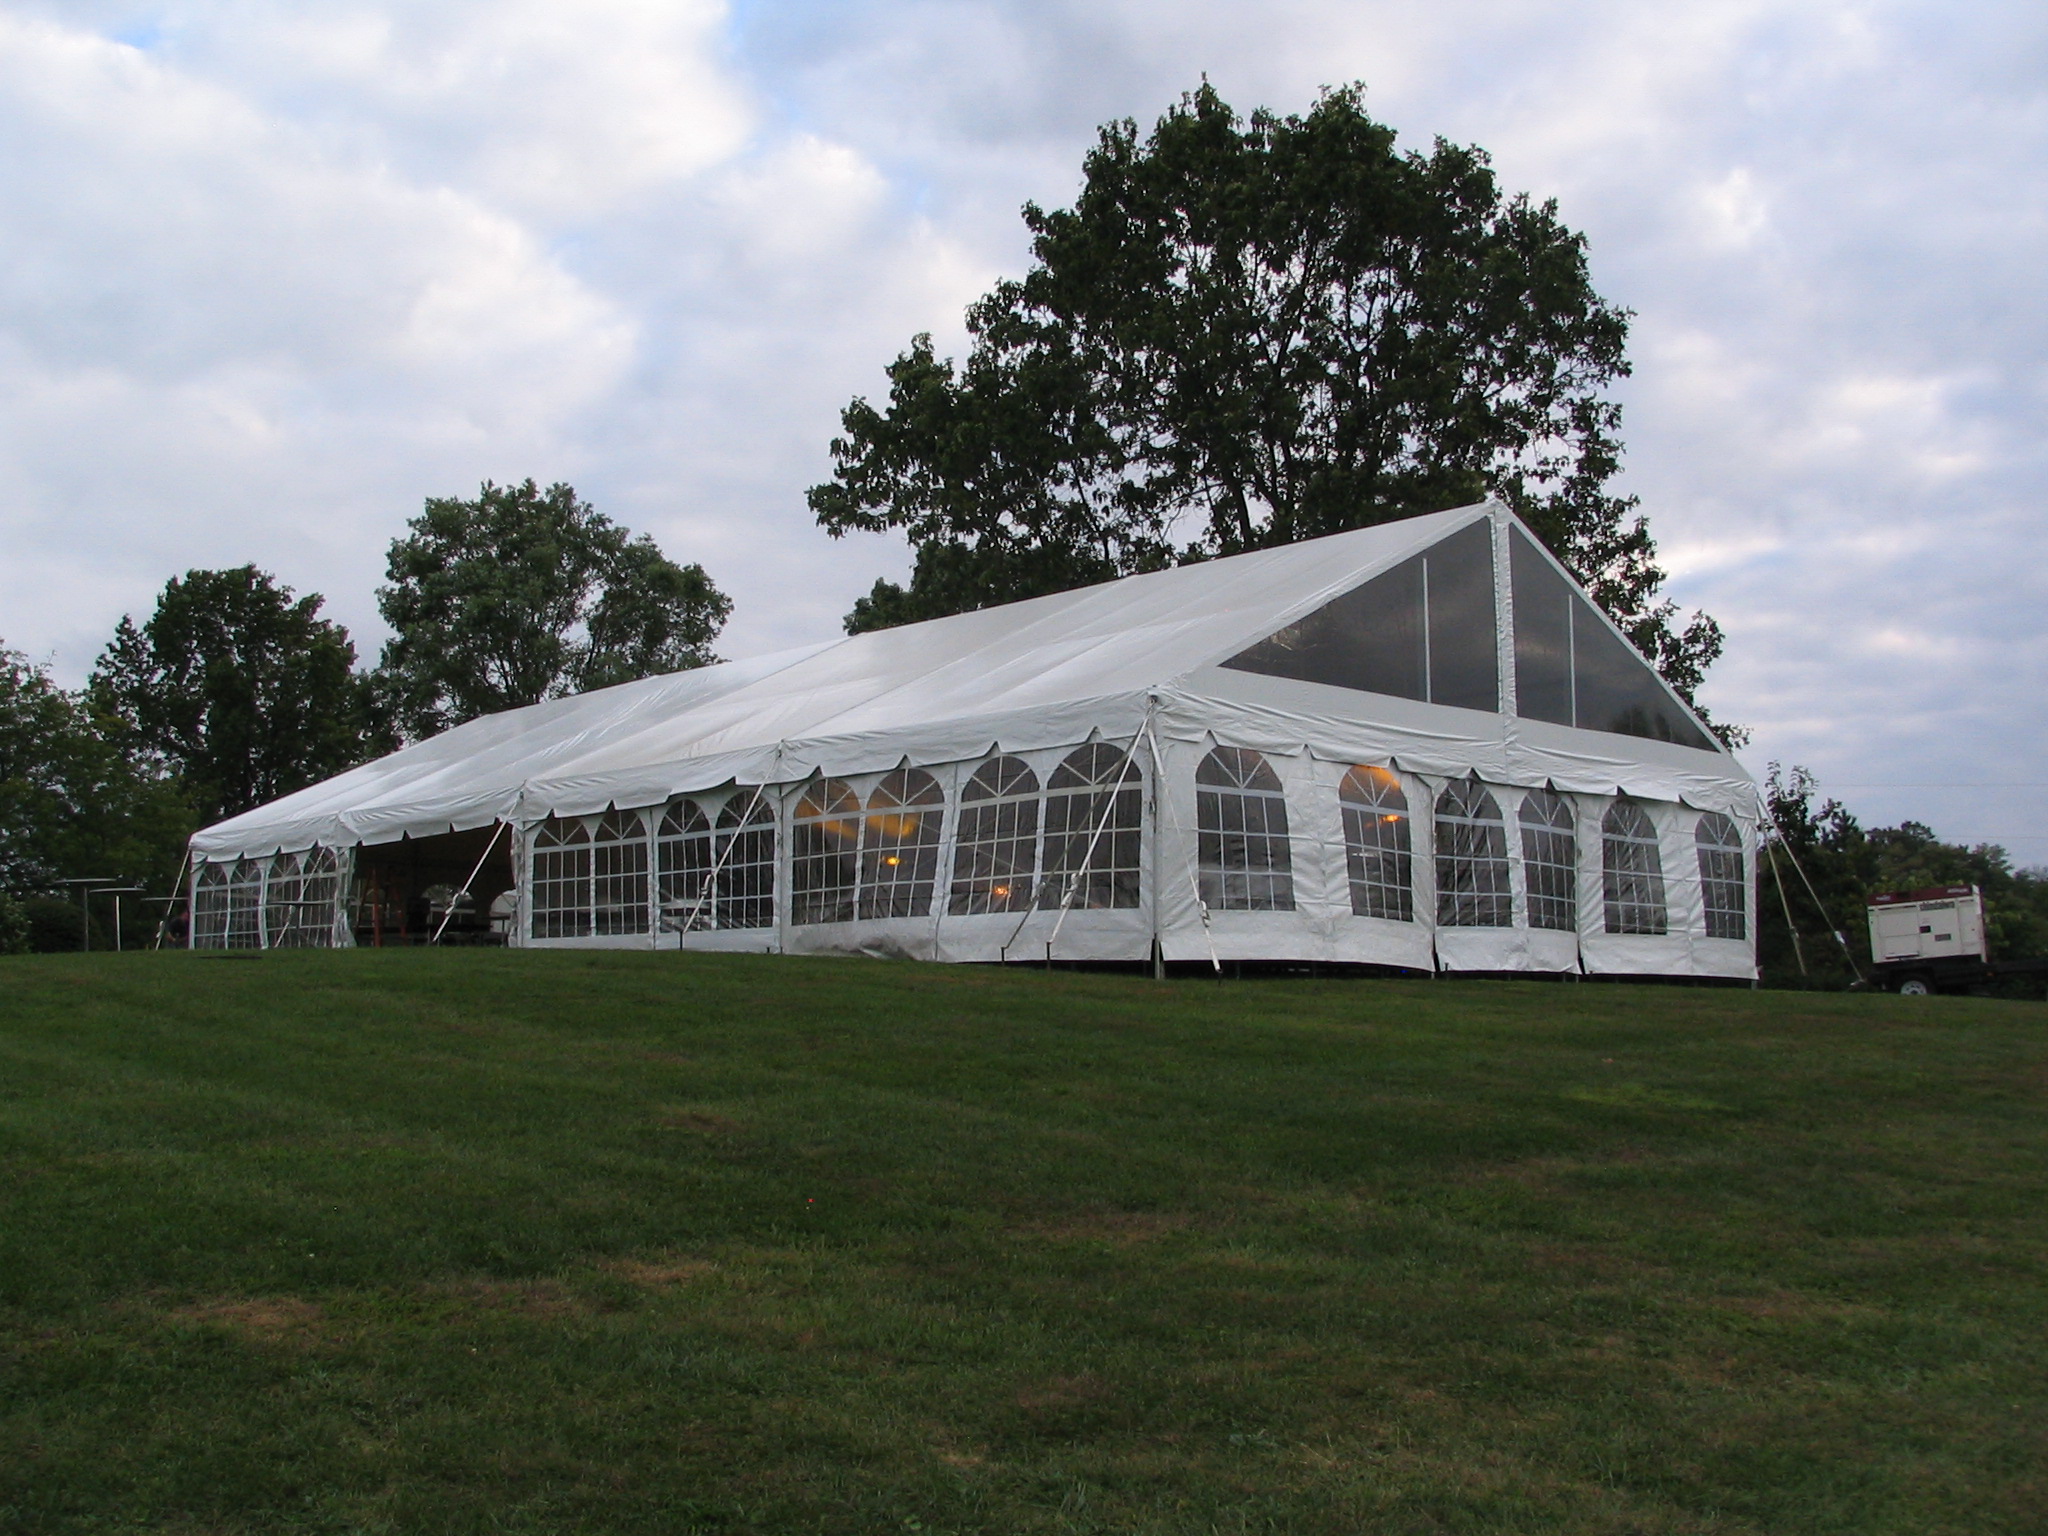 Wedding tents for rent in Allentown PA